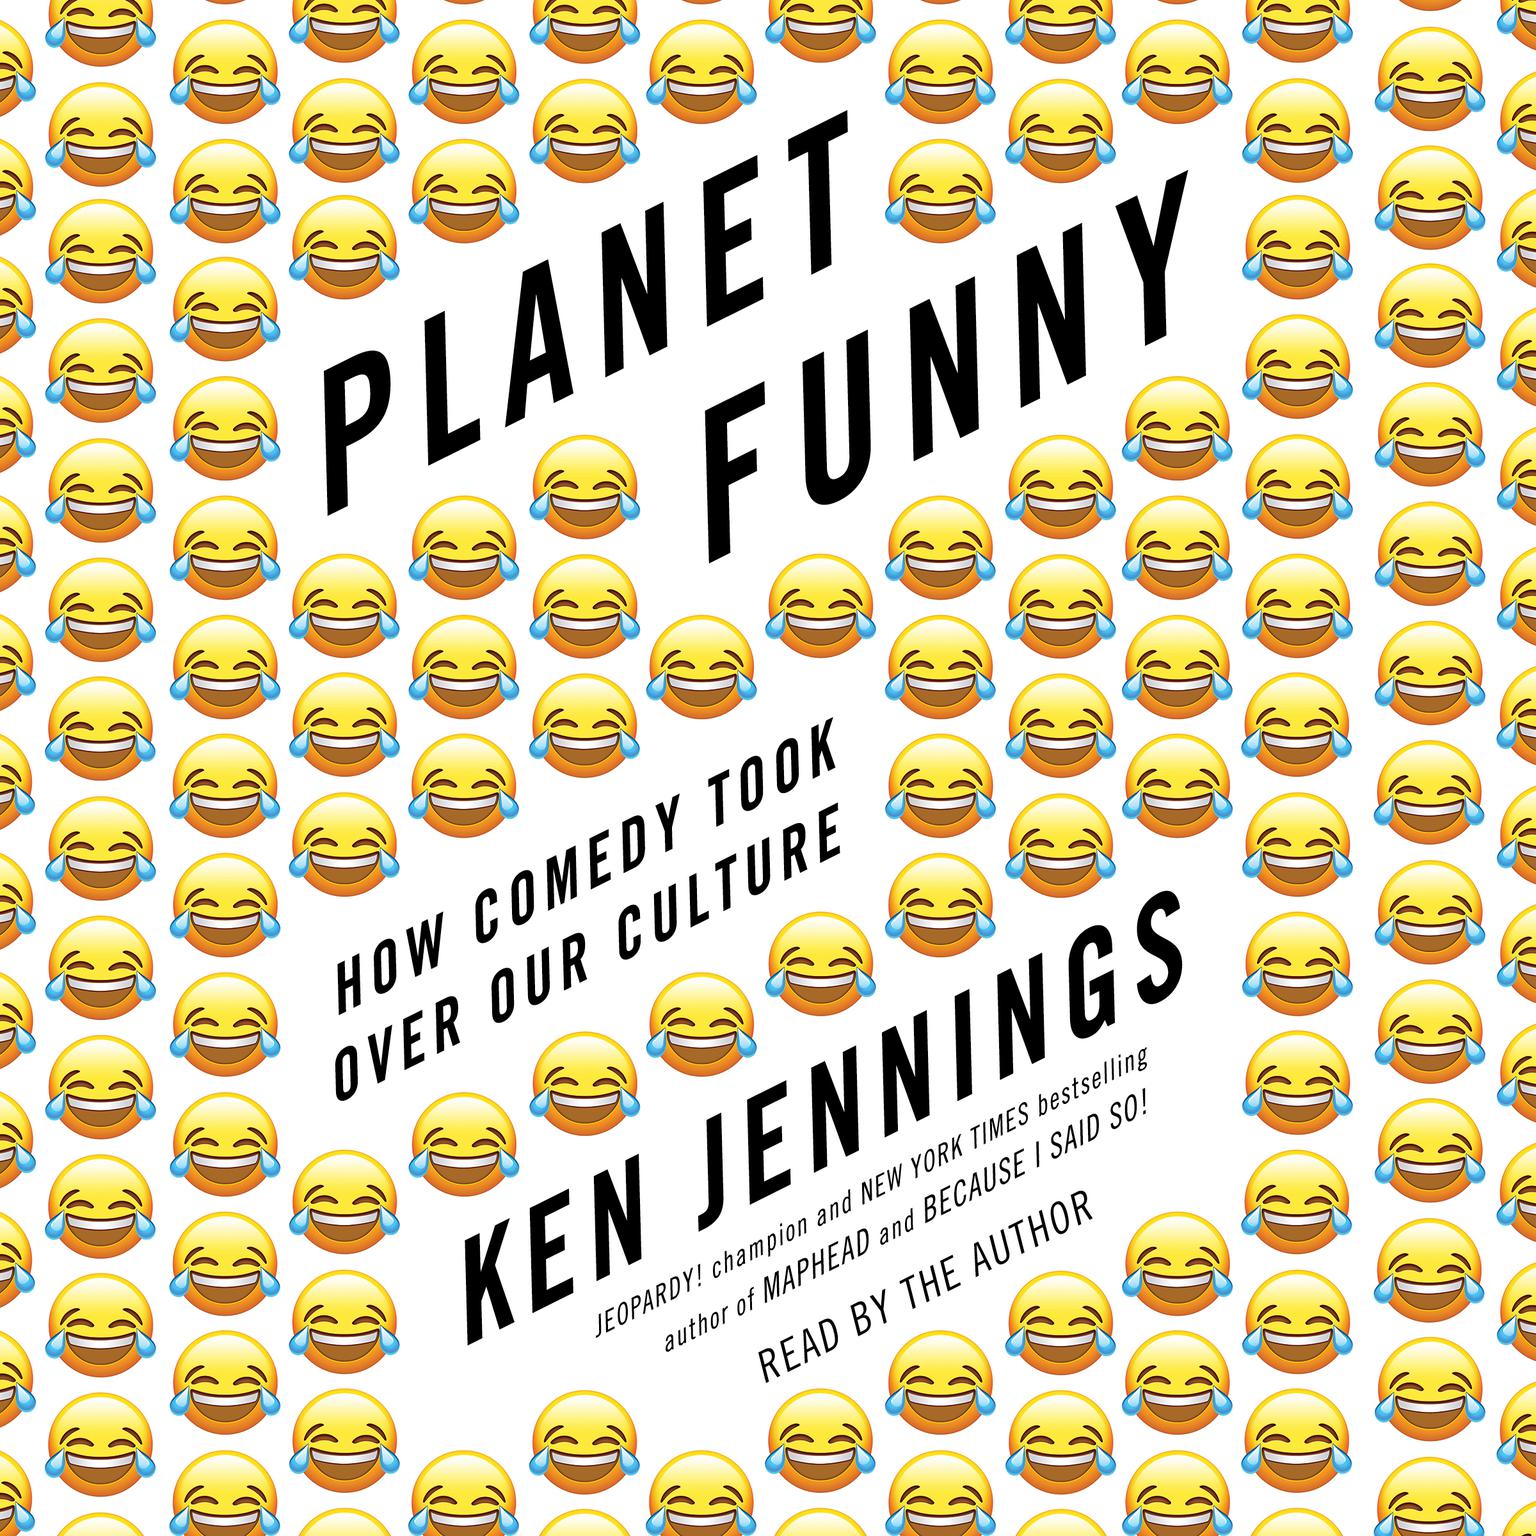 Planet Funny: How Comedy Took Over Our Culture Audiobook, by Ken Jennings